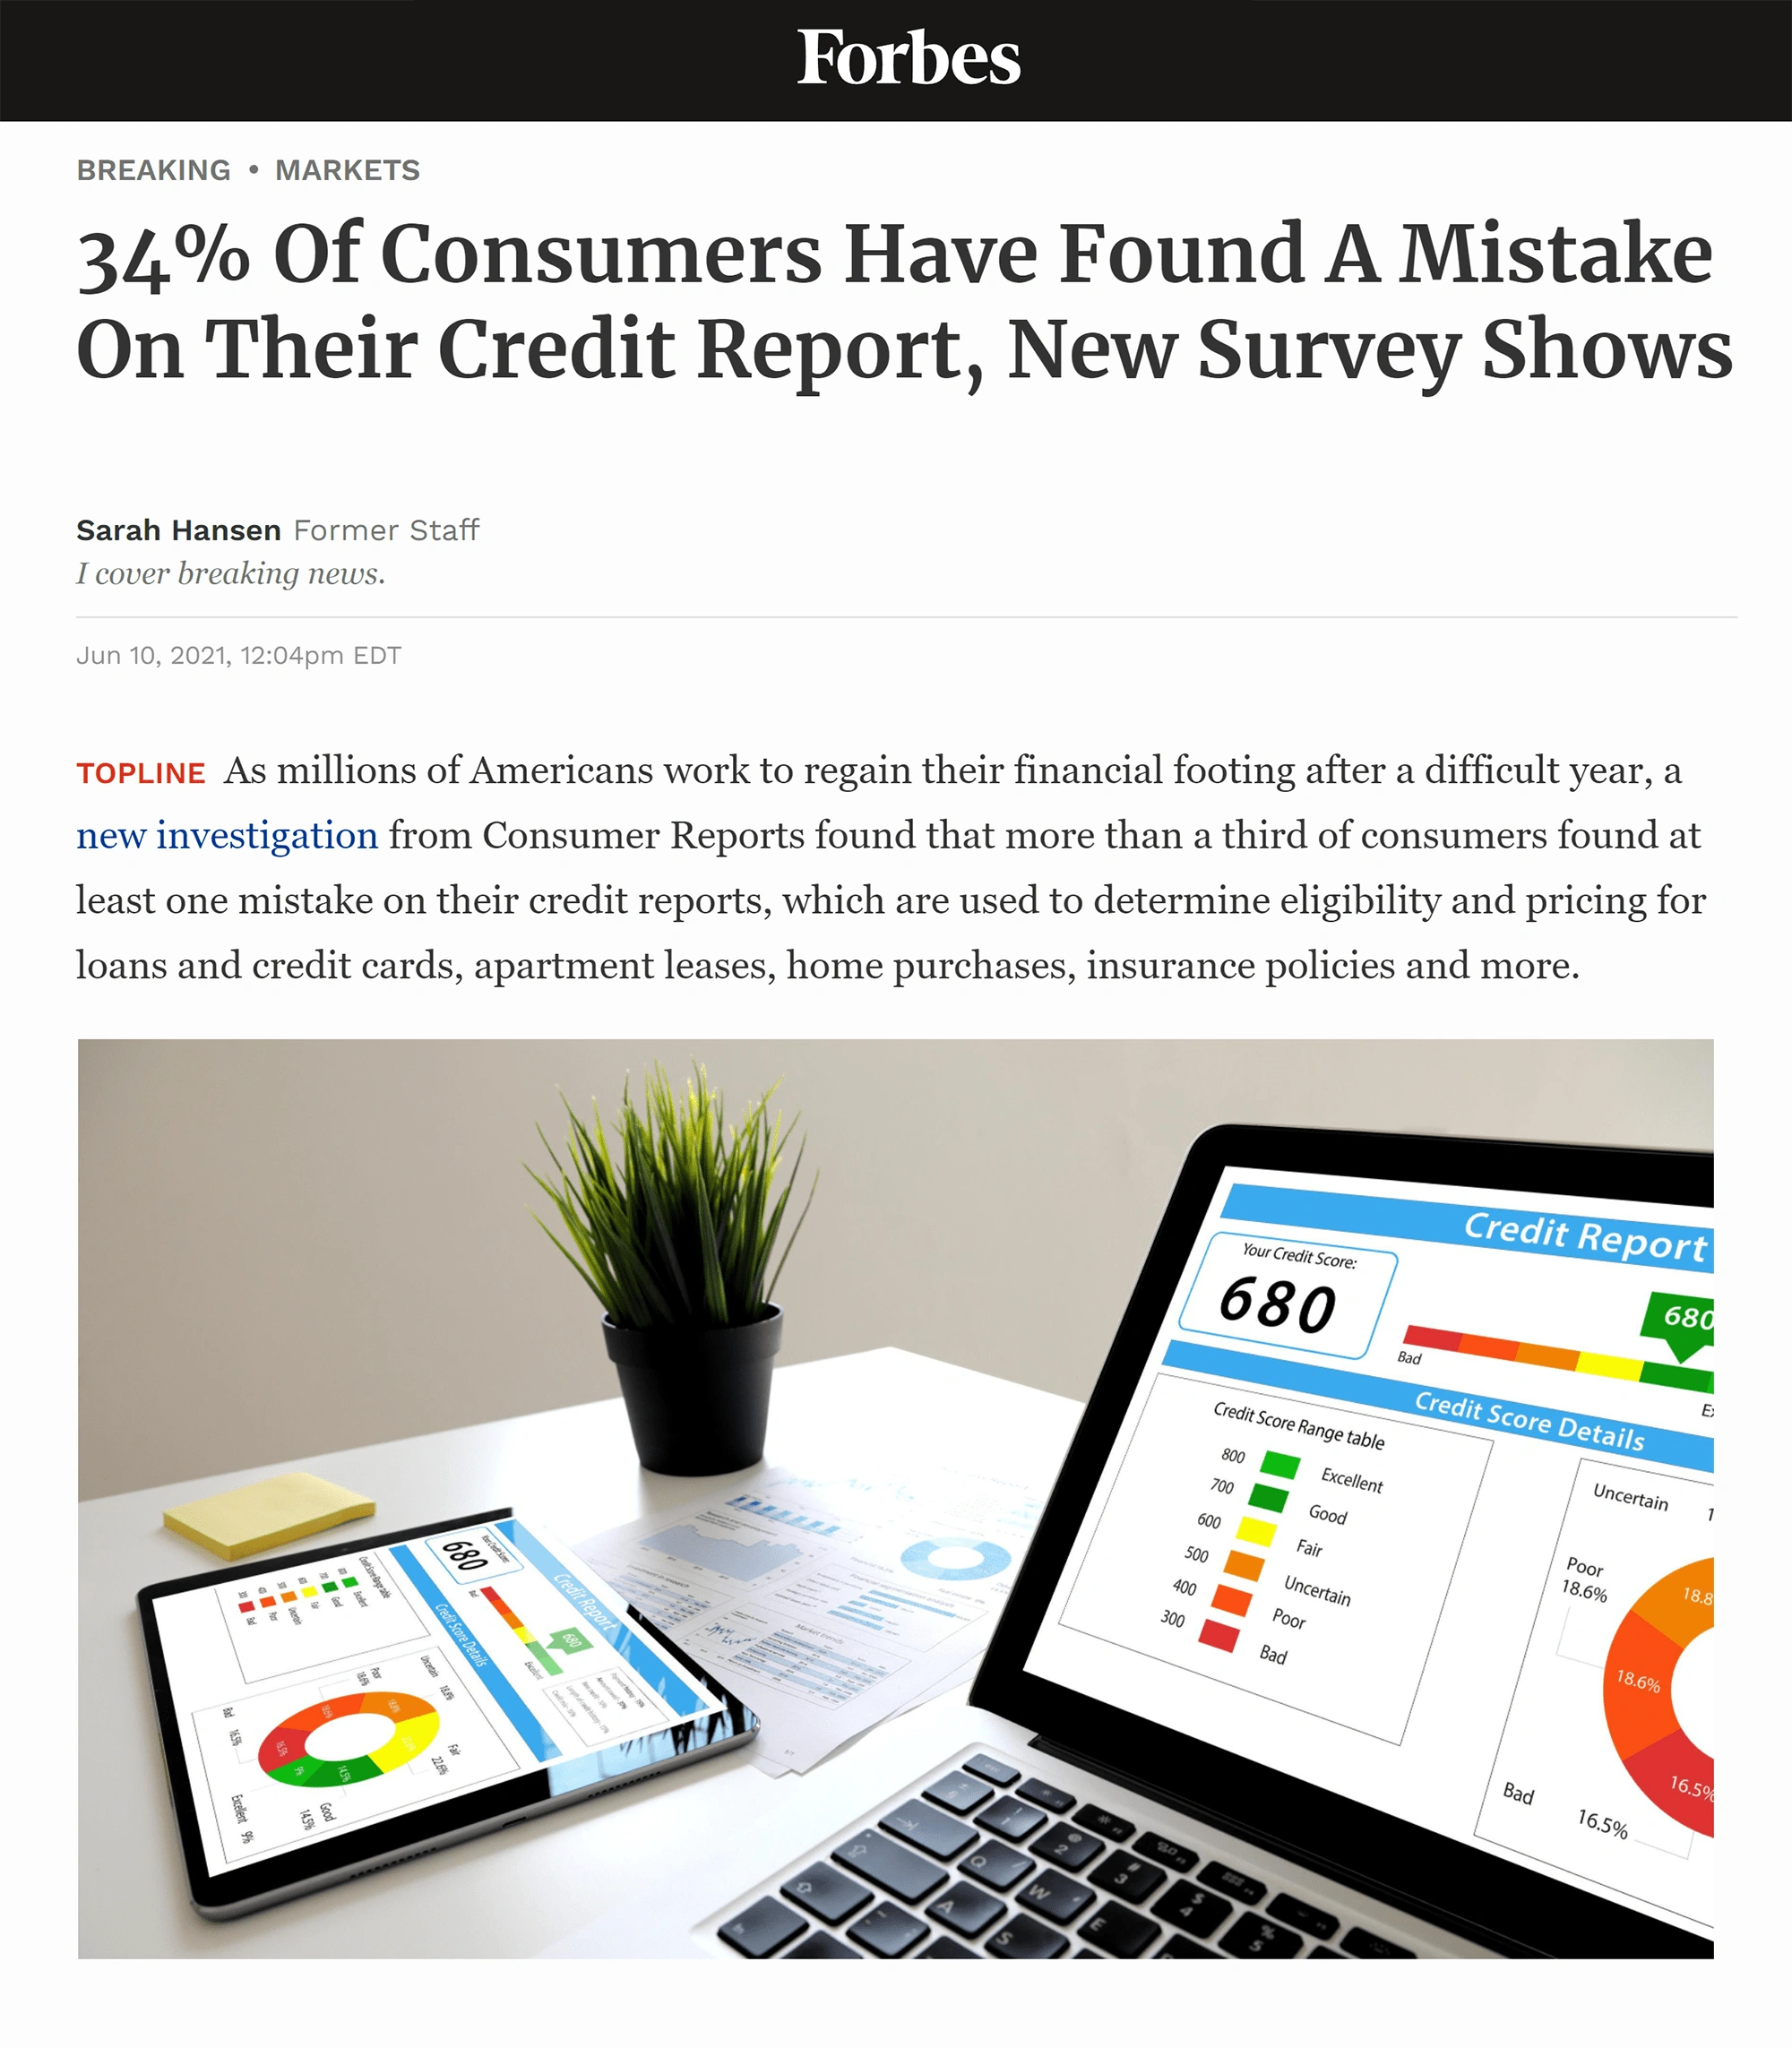 forbes-mistake-on-credit-report-min.png